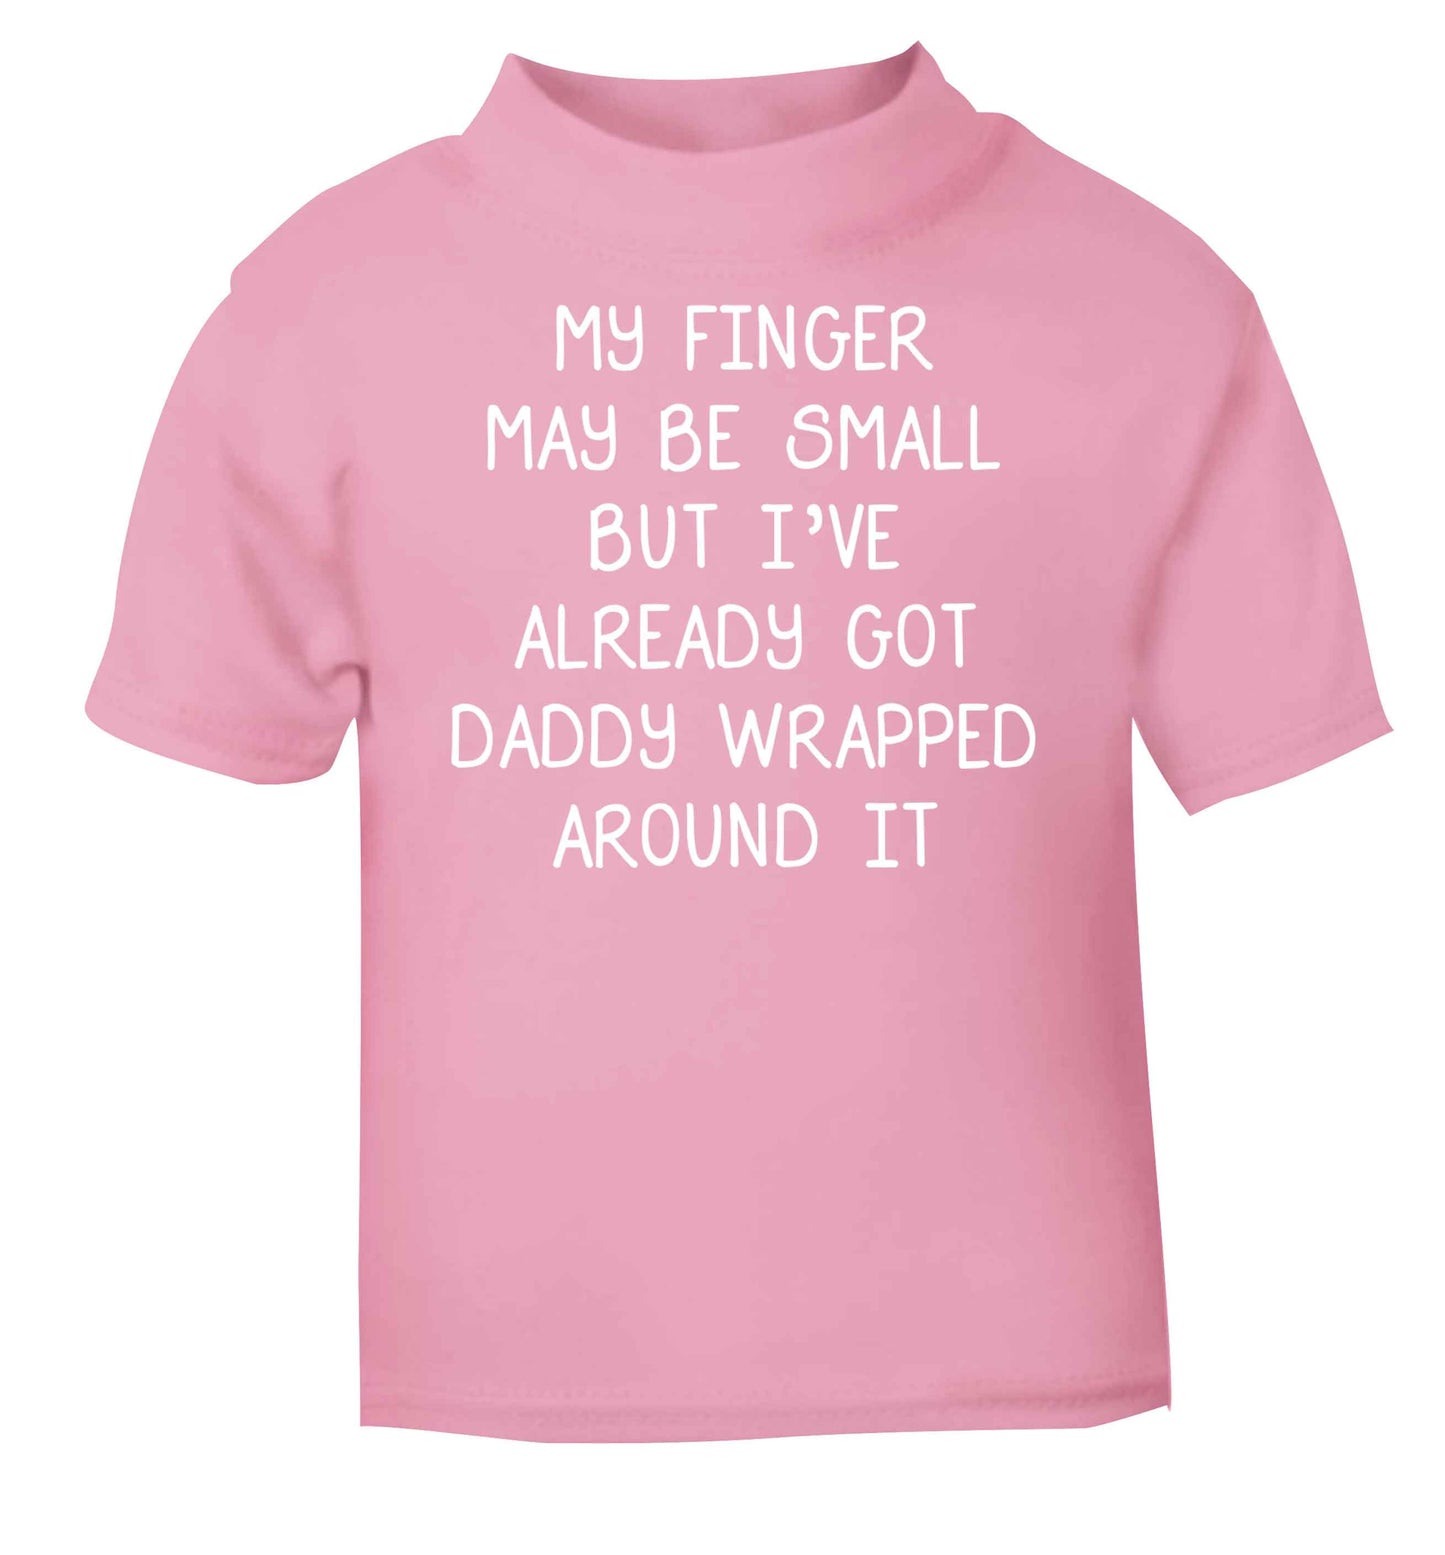 My finger may be small but I've already got daddy wrapped around it light pink baby toddler Tshirt 2 Years